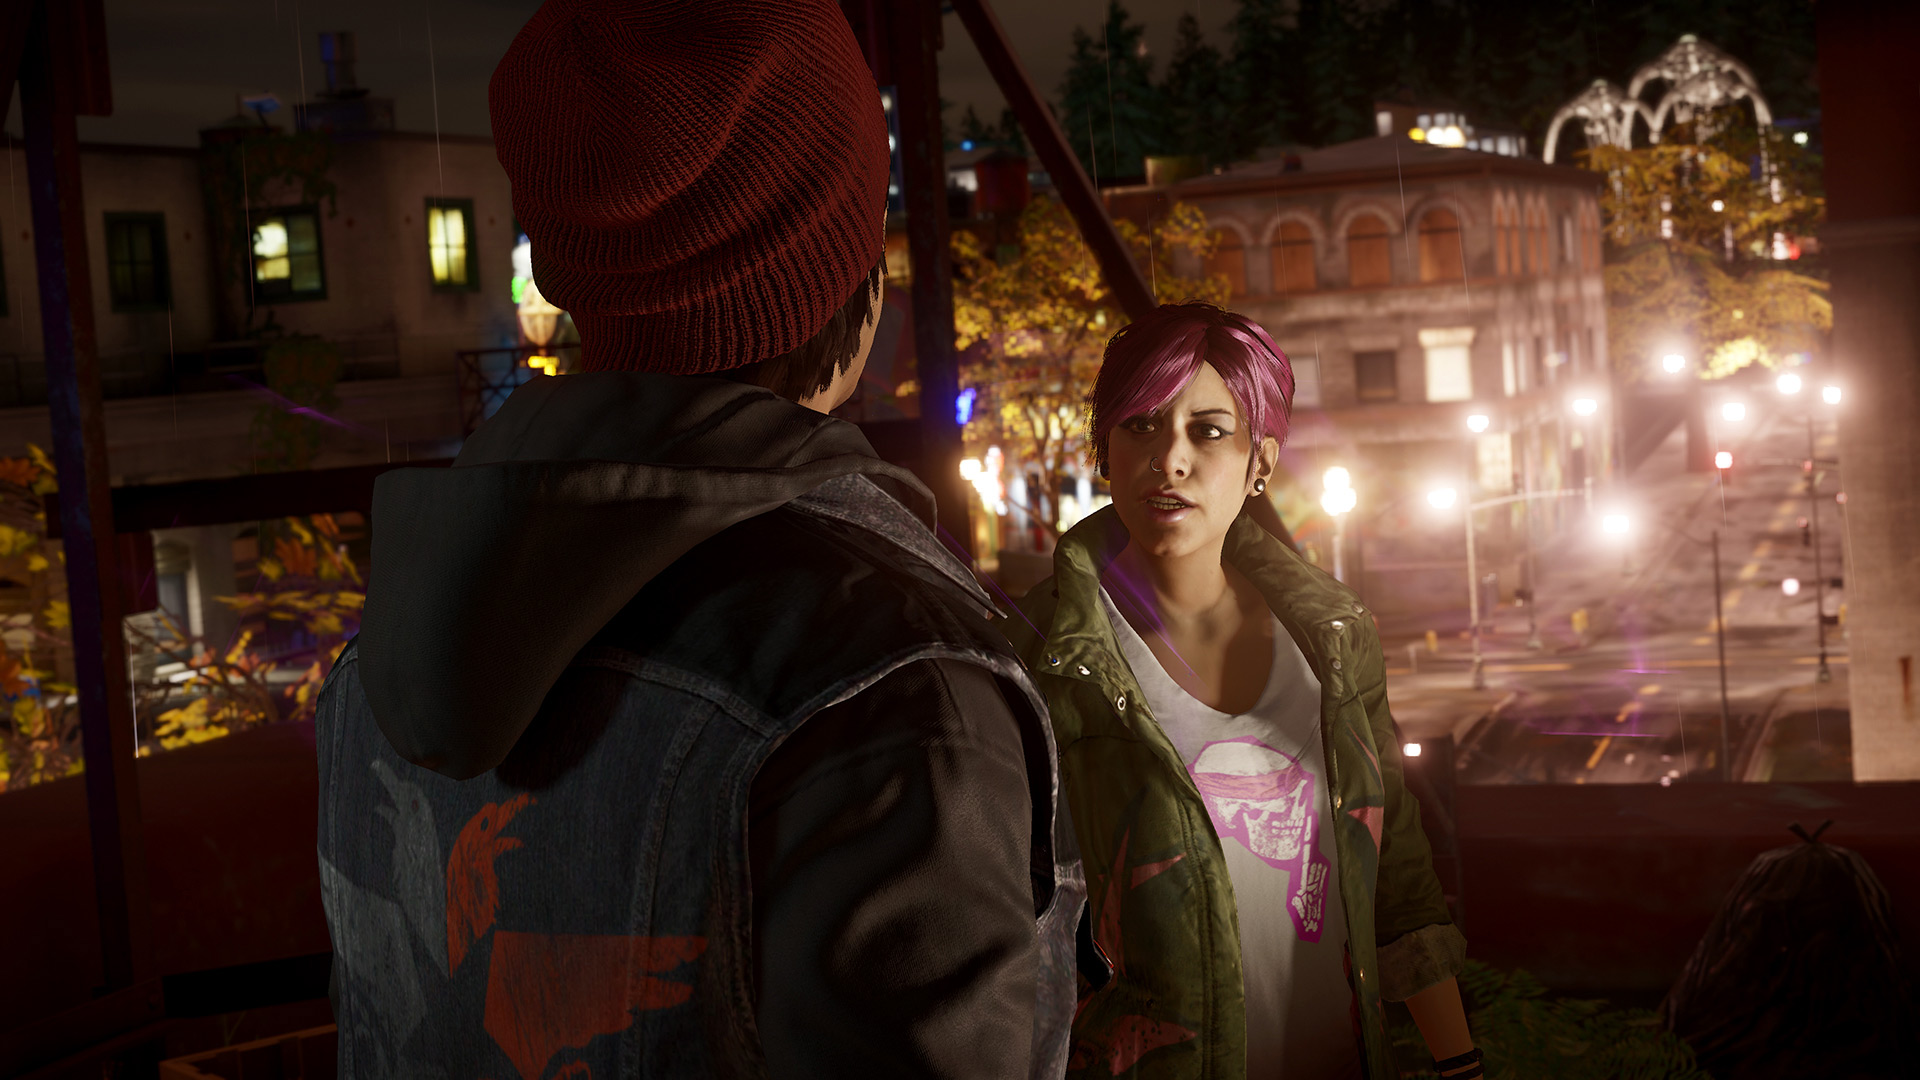 Bellevue videogame company sets 'Infamous: Second Son' in Seattle